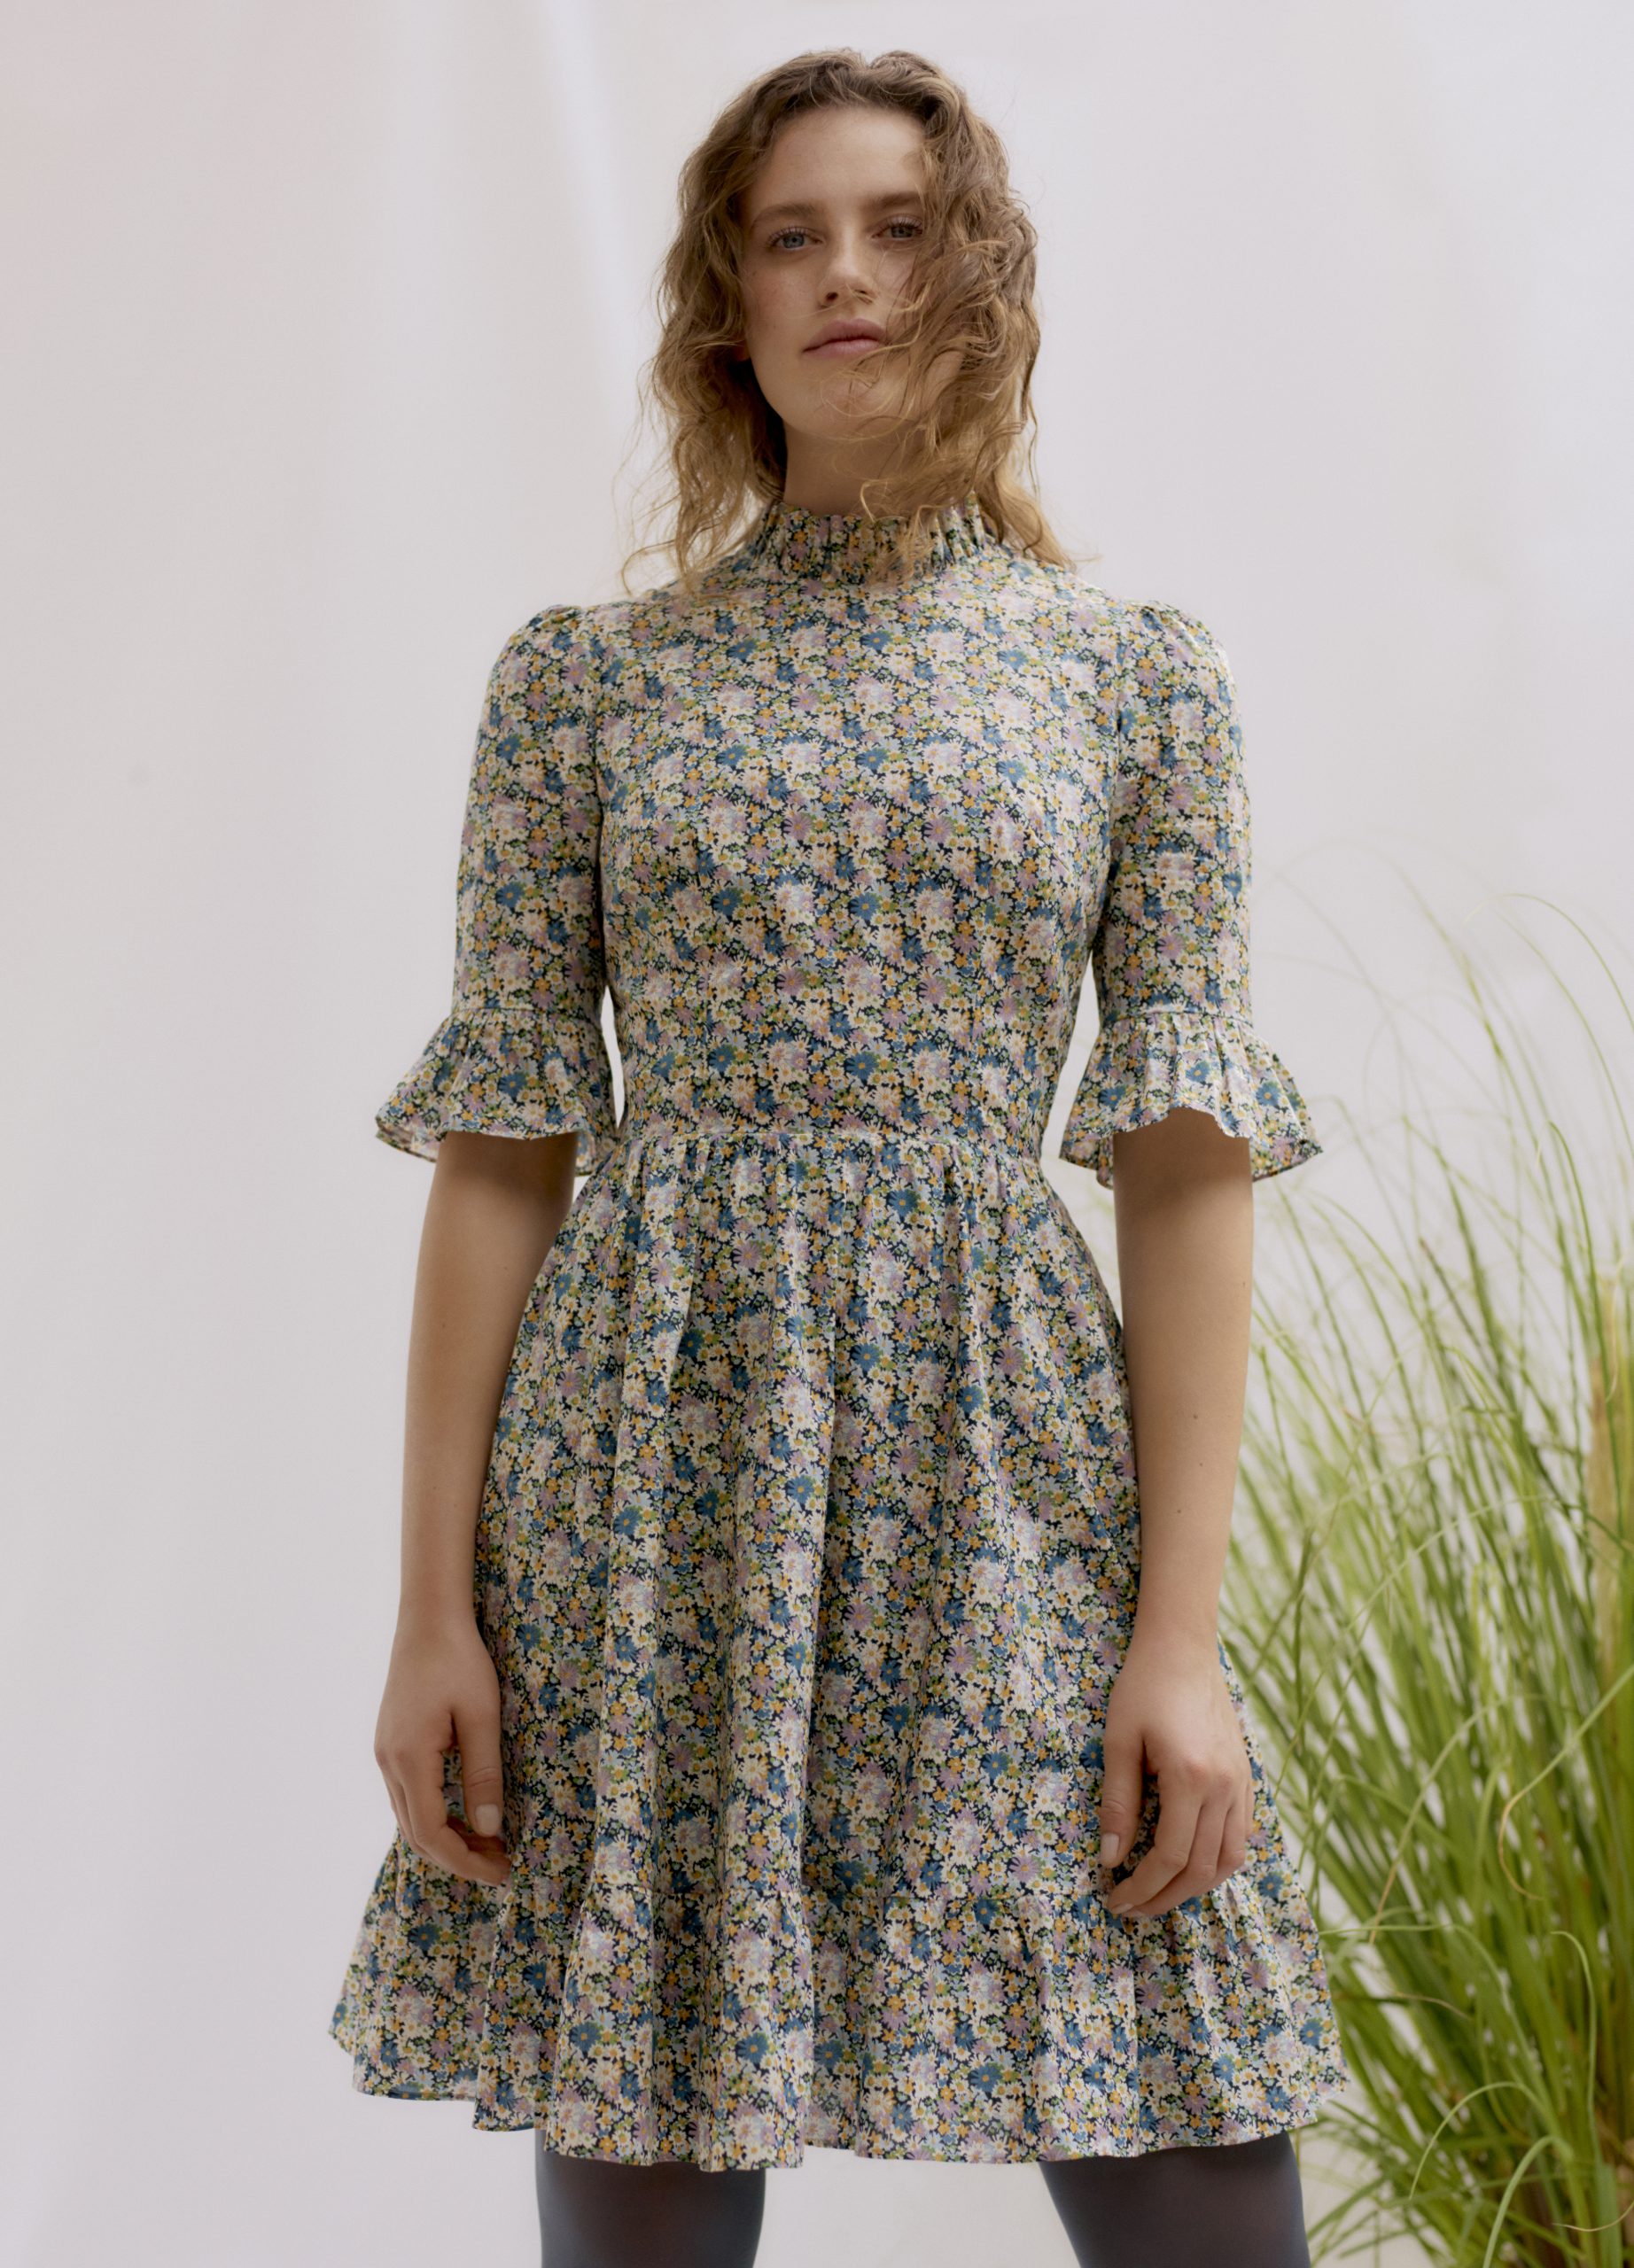 Woman wearing the Alexa Frill Dress sewing pattern by Liberty Sewing Patterns. A dress pattern made in cotton, satin or poplin fabrics, featuring elbow length sleeves with frill, stand frill collar, fitted bodice, flared skirt with tiered frill and back z